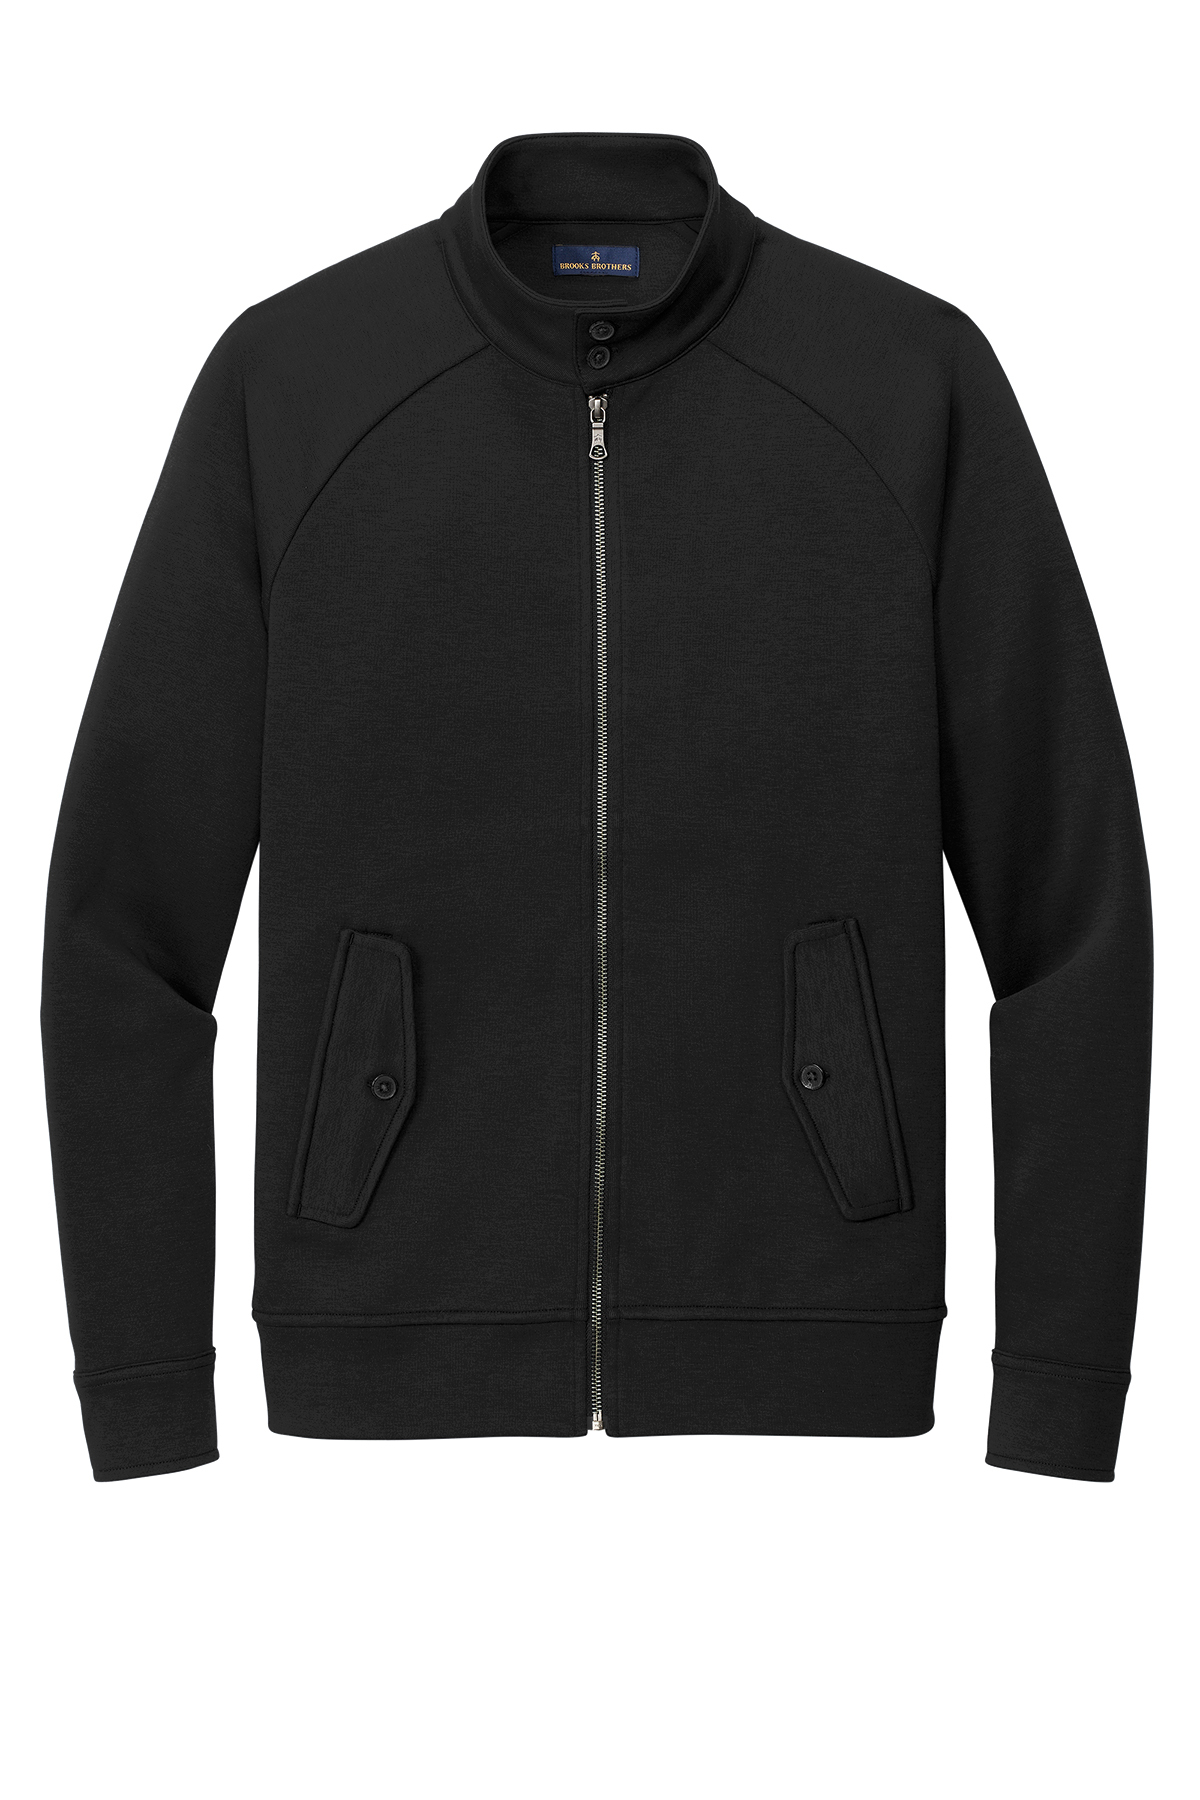 Brooks Brothers Double-Knit Full-Zip | Product | SanMar